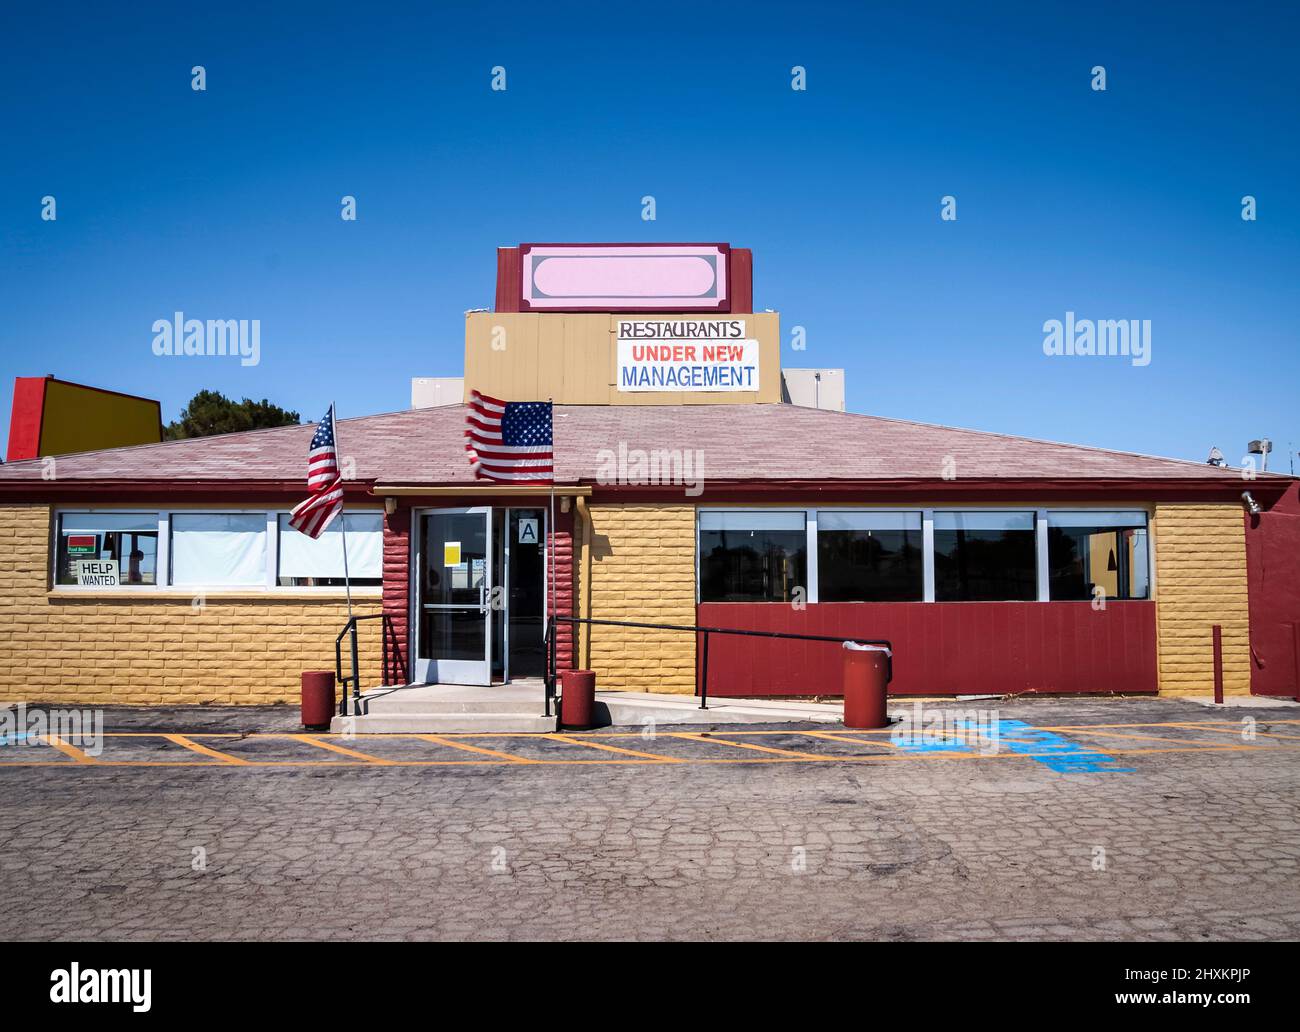 Restaurant with a under new management sign along route 66. Stock Photo